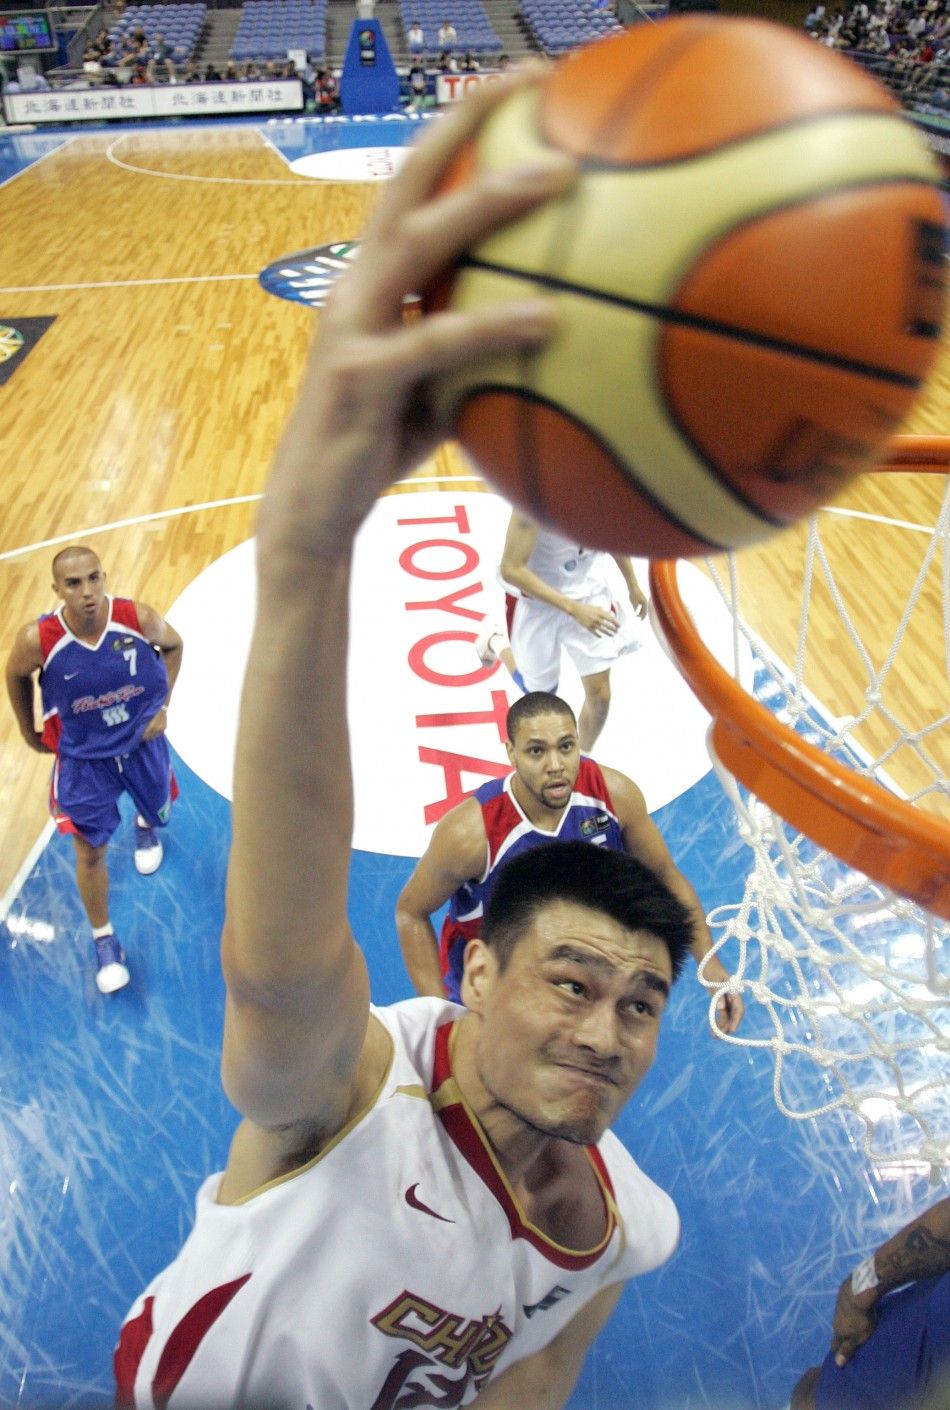 Chinas Yao slam dunks during their first round defeat to Puerto Rico during world basketball championships in Sapporo